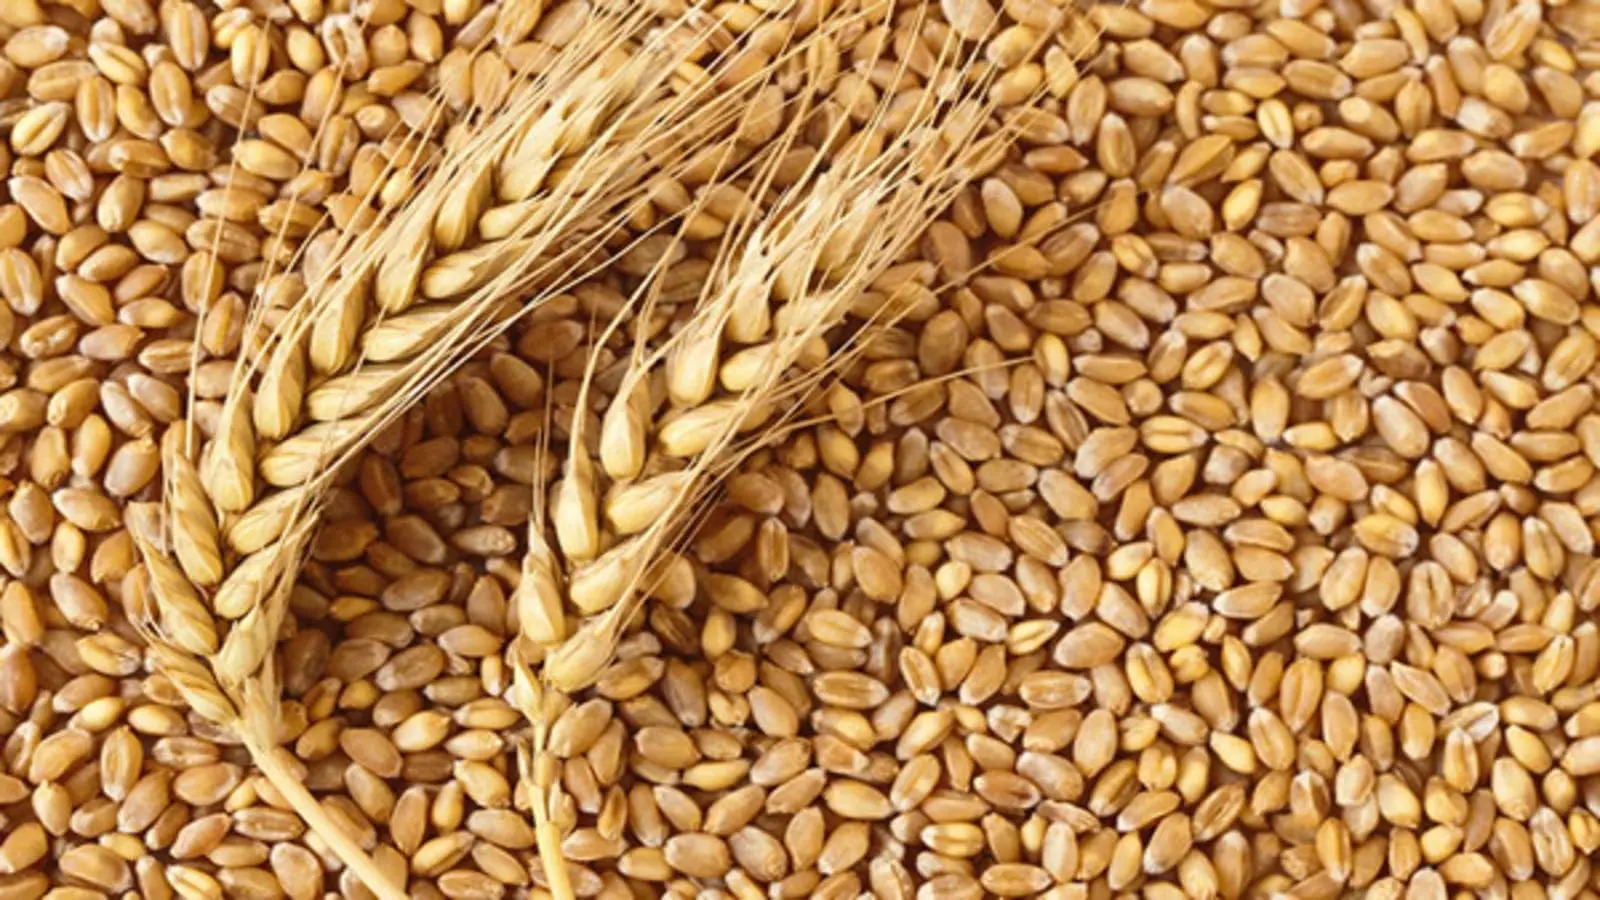 Saudi Arabia Secures 1,353,000 Tons of Wheat in Recent Tender Acquisition